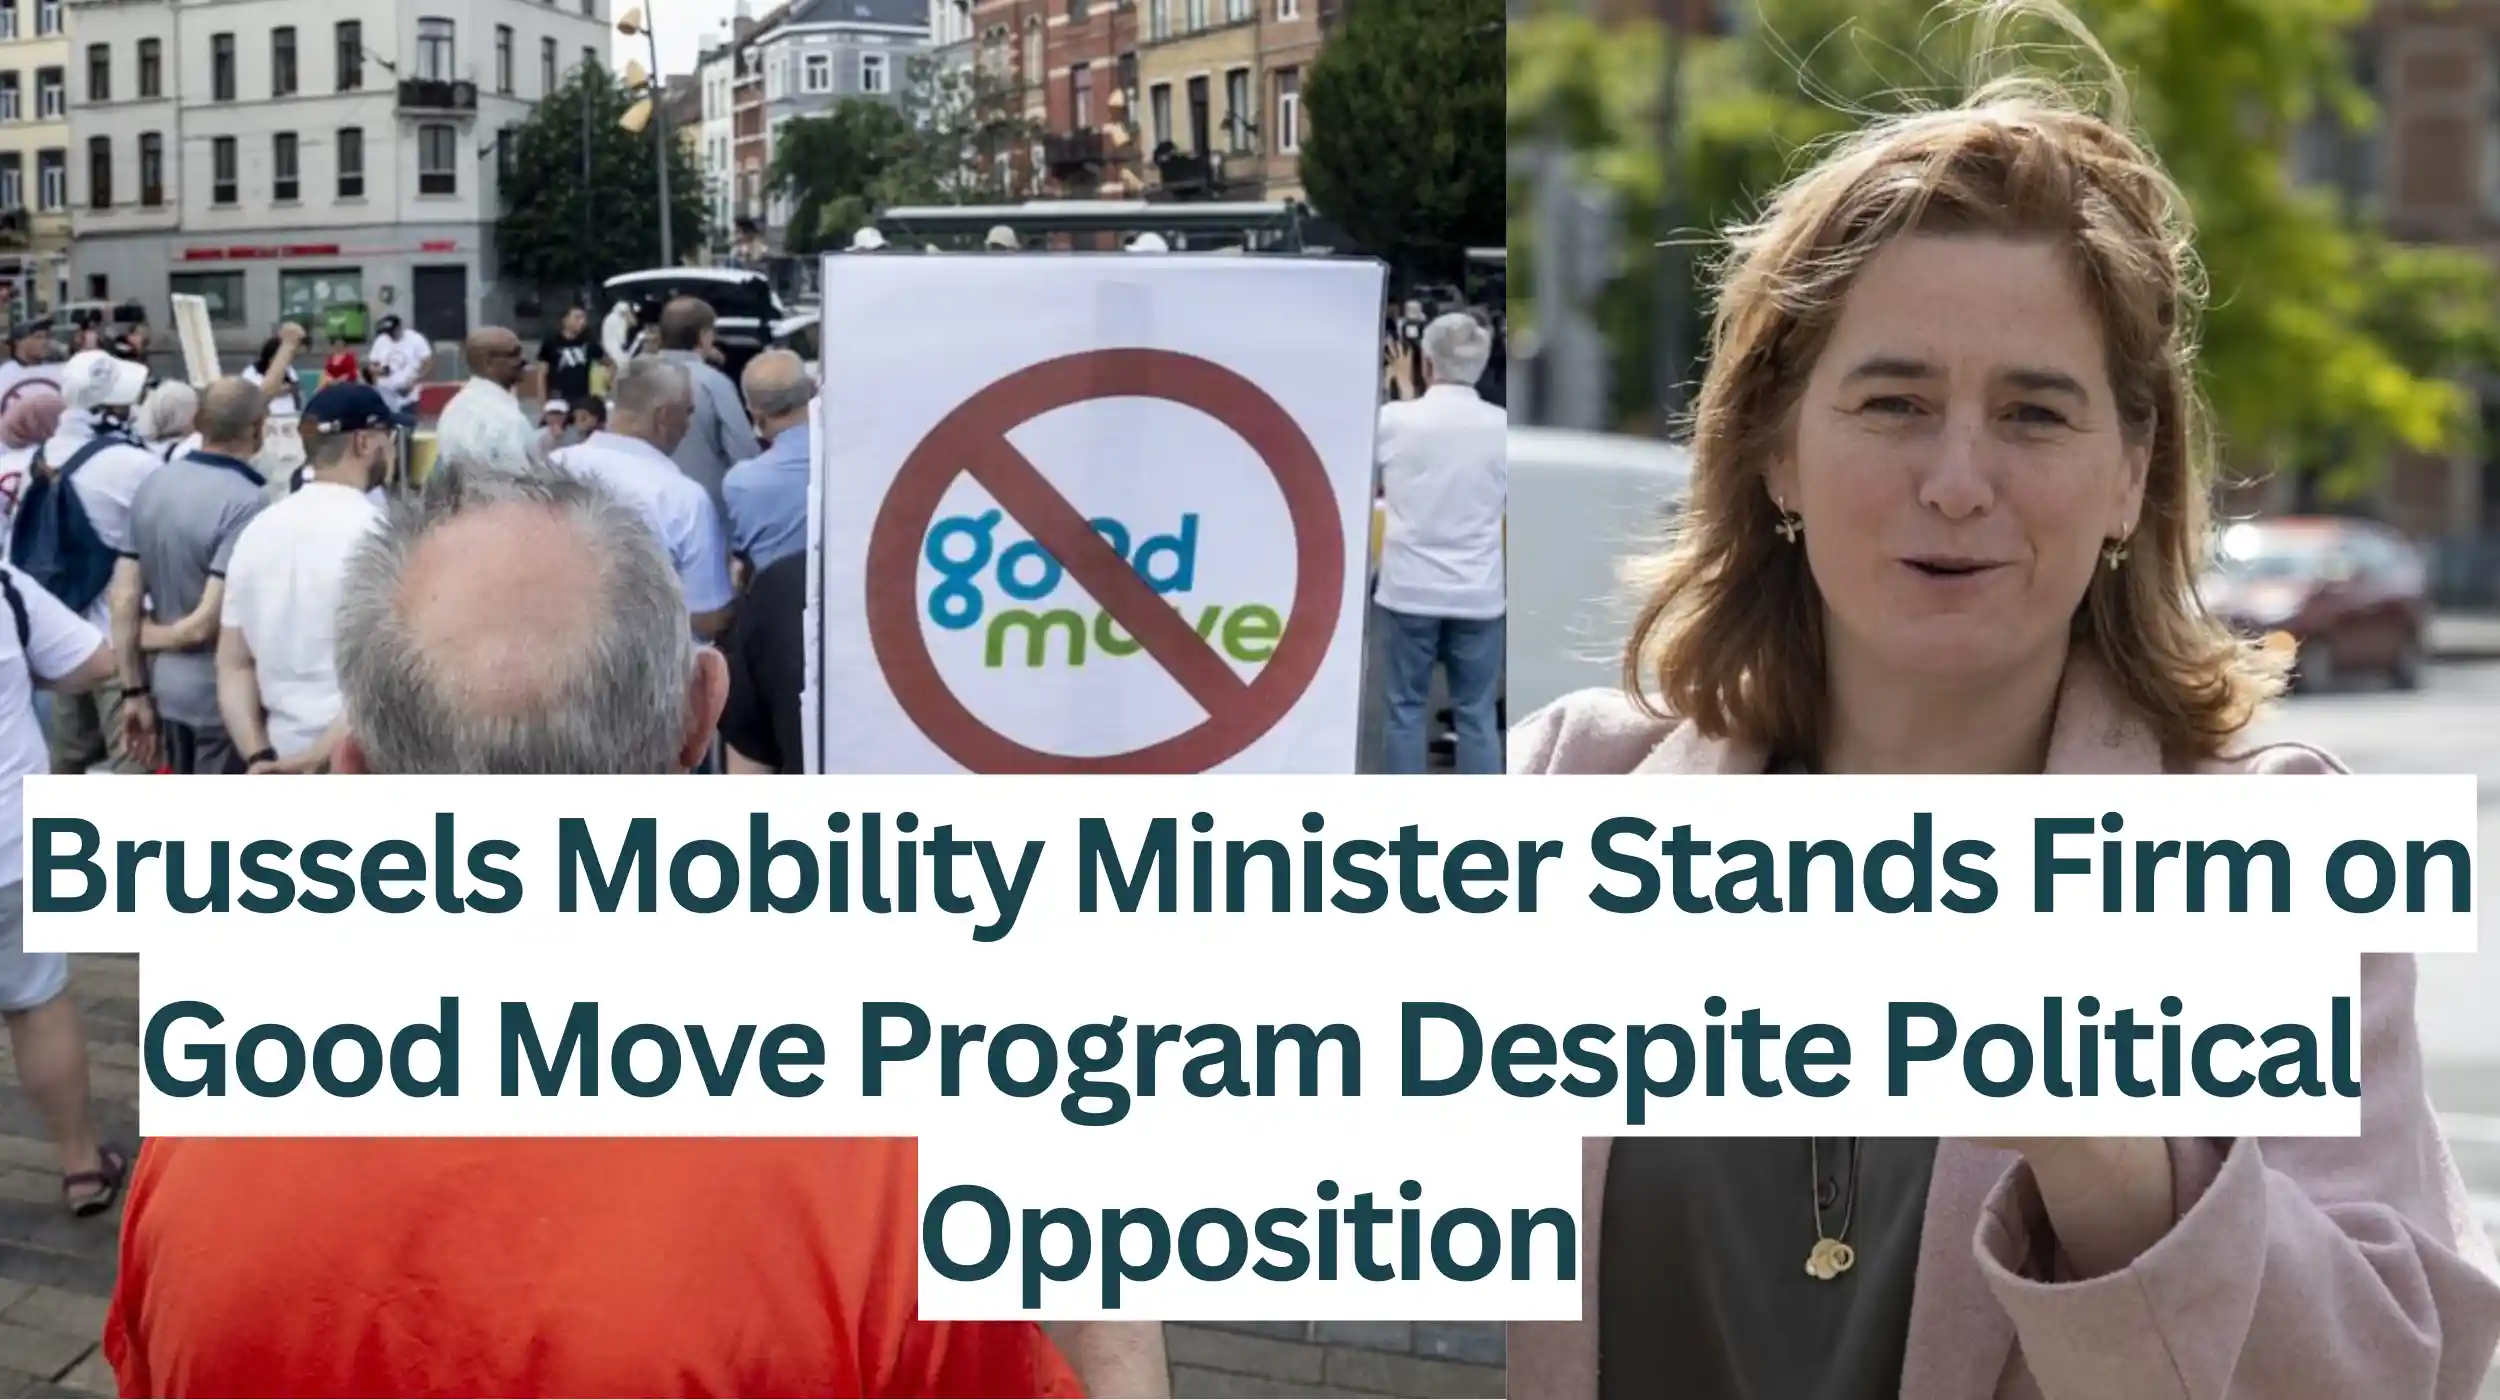 Brussels-Mobility-Minister-Stands-Firm-on-Good-Move-Program-Despite-Political-Opposition